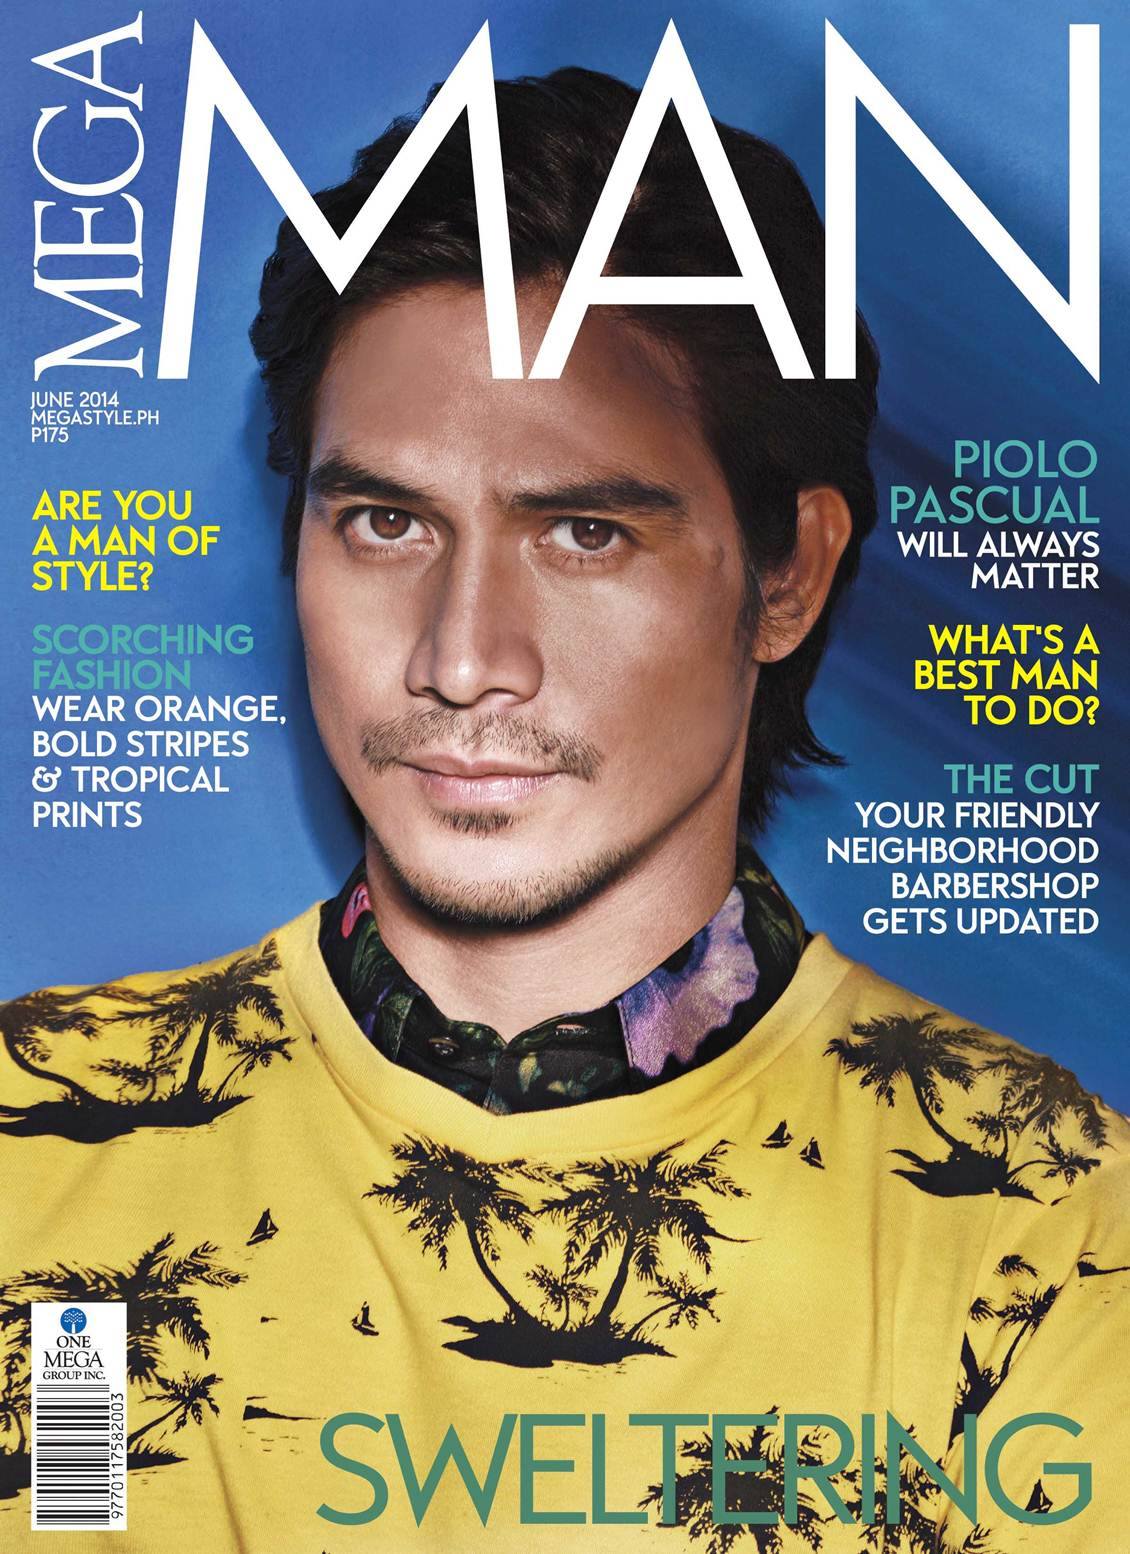 MEGA MAN June Cover Issue Featuring Piolo Pascual